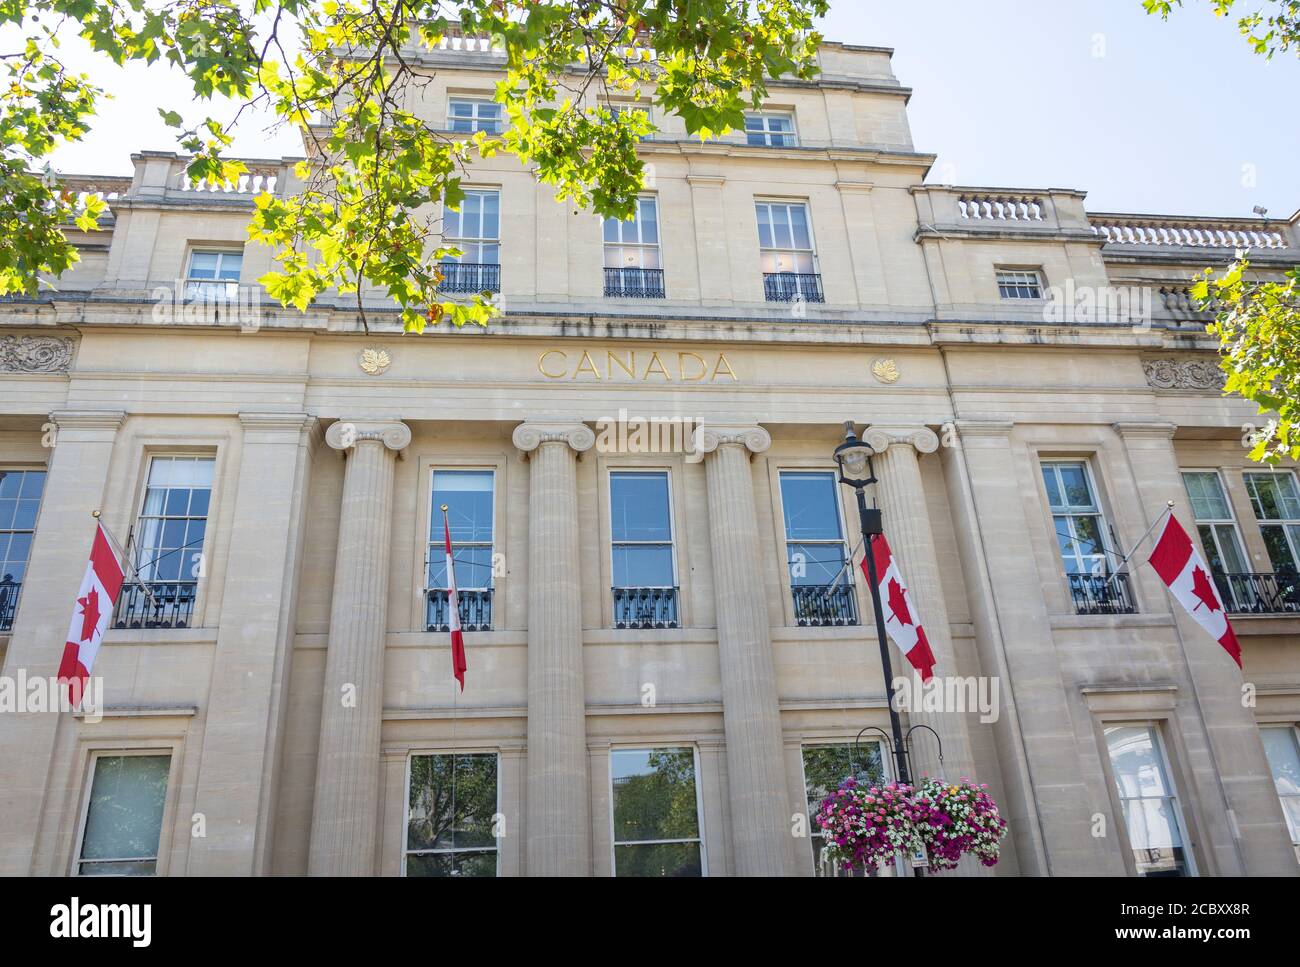 Canadian High Commission, Canada House, Trafalgar Square, City of Westminster, Greater London, England, United Kingdom Stock Photo